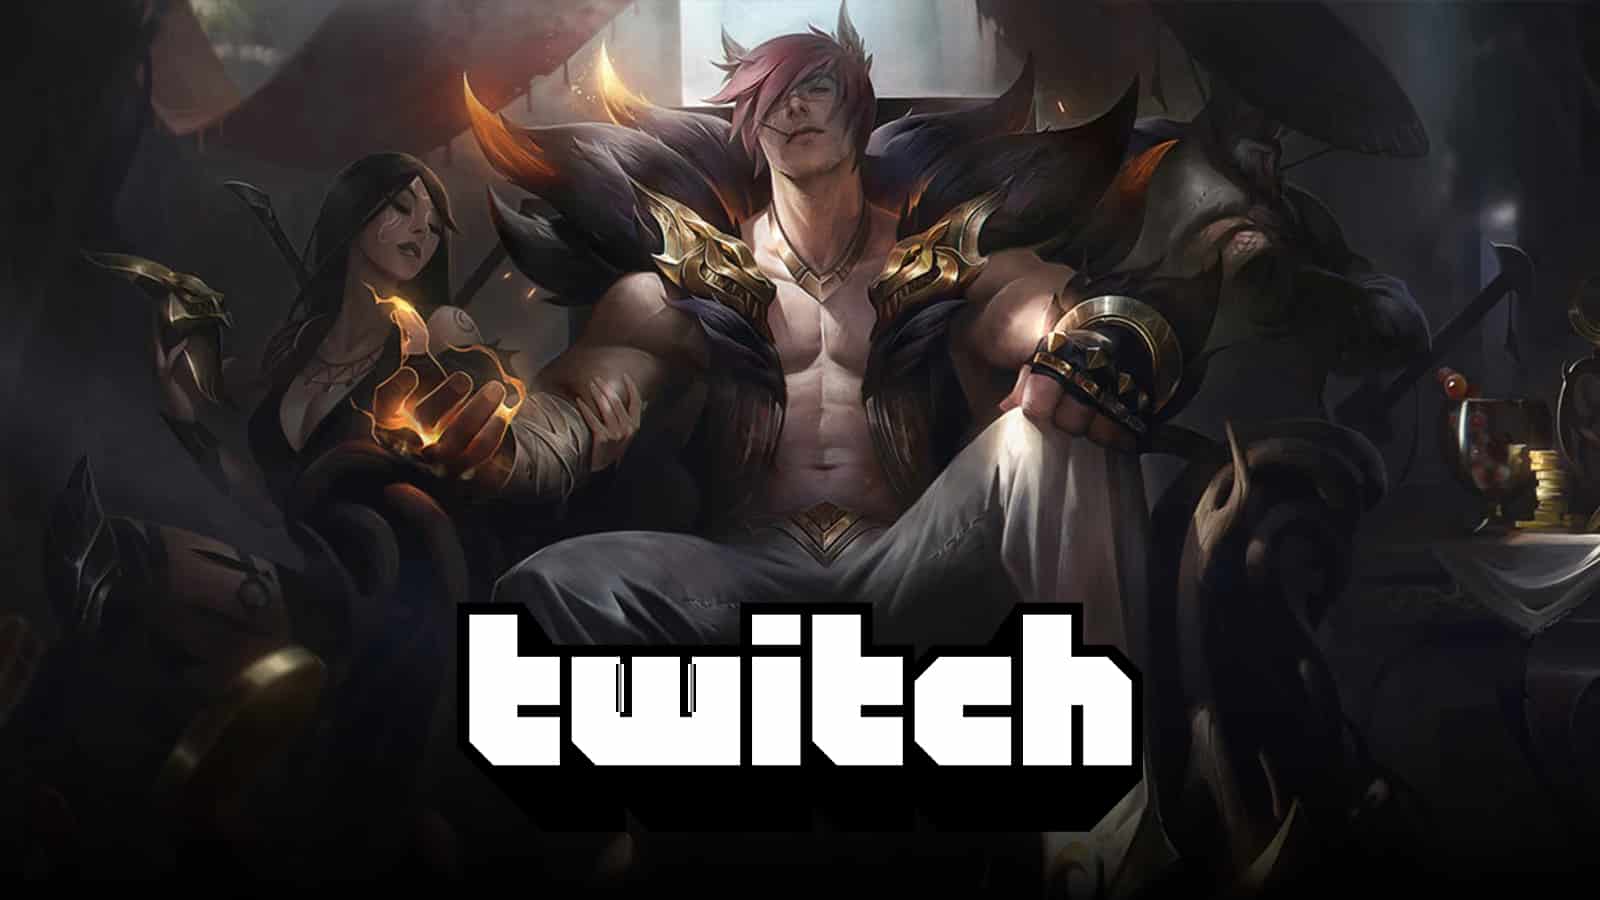 League of Legends' Sett sitting on throne next to Twitch logo